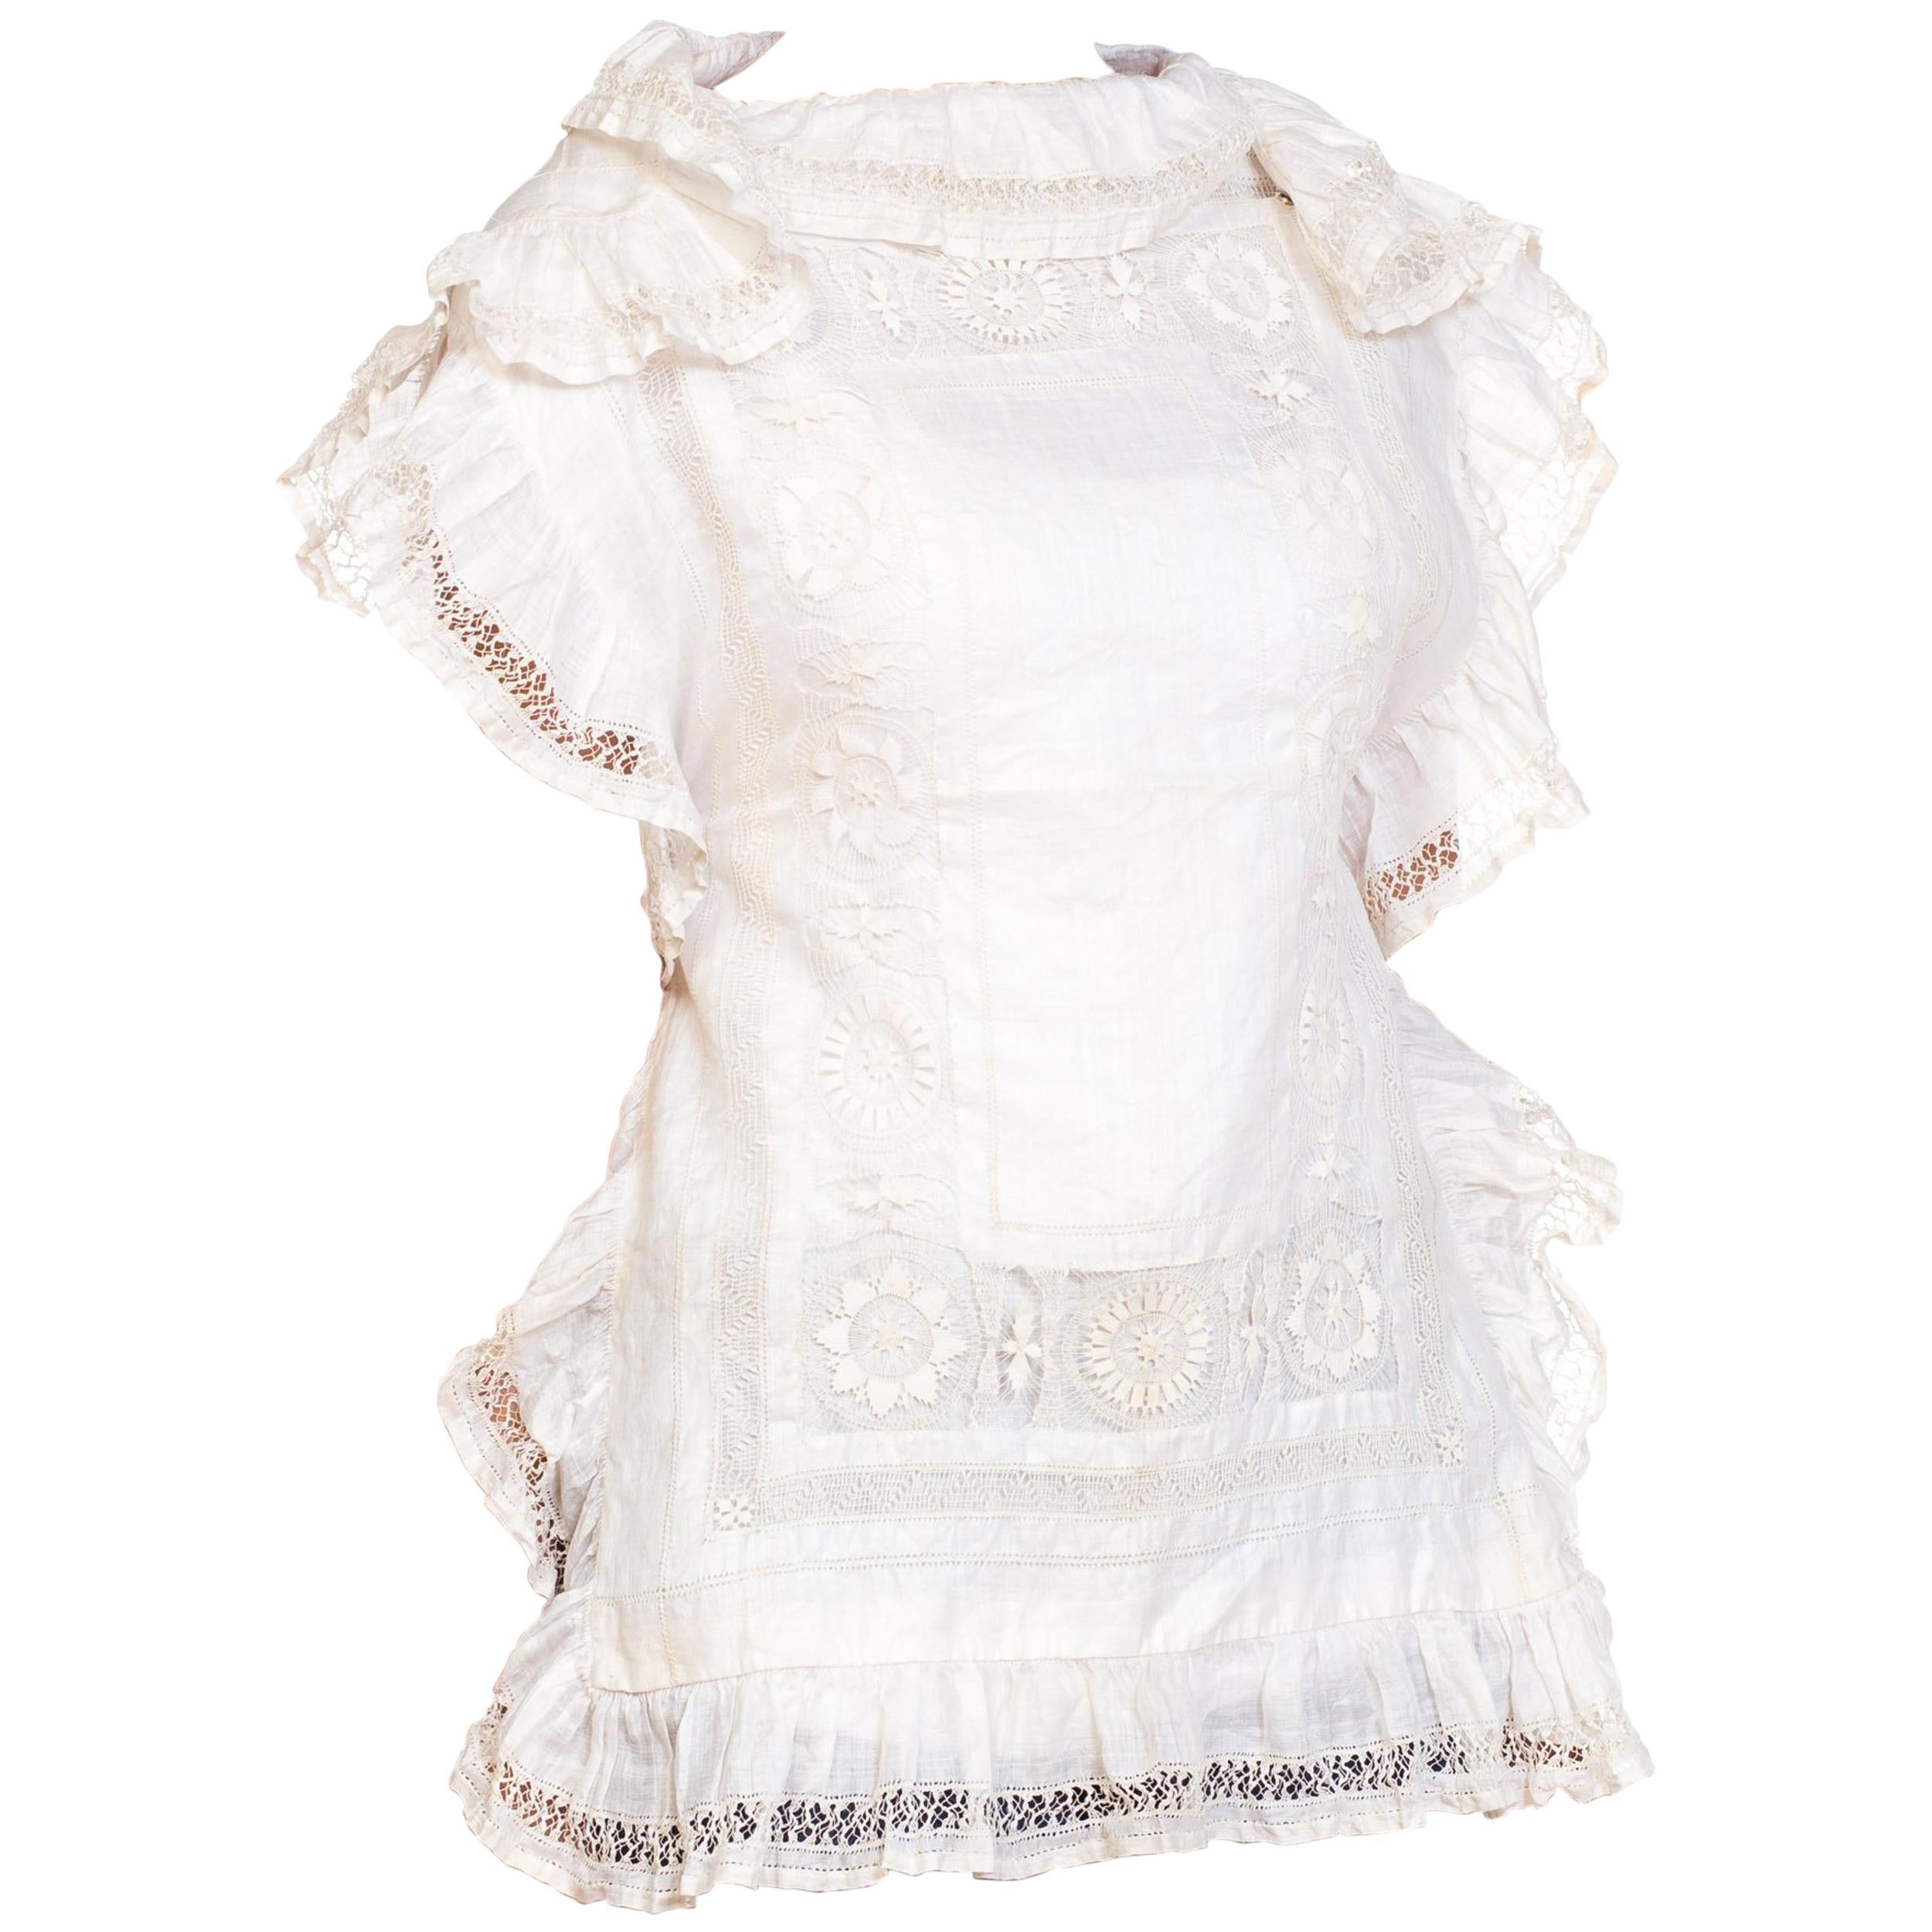 Handmade Lace & Linen Victorian Lace Top